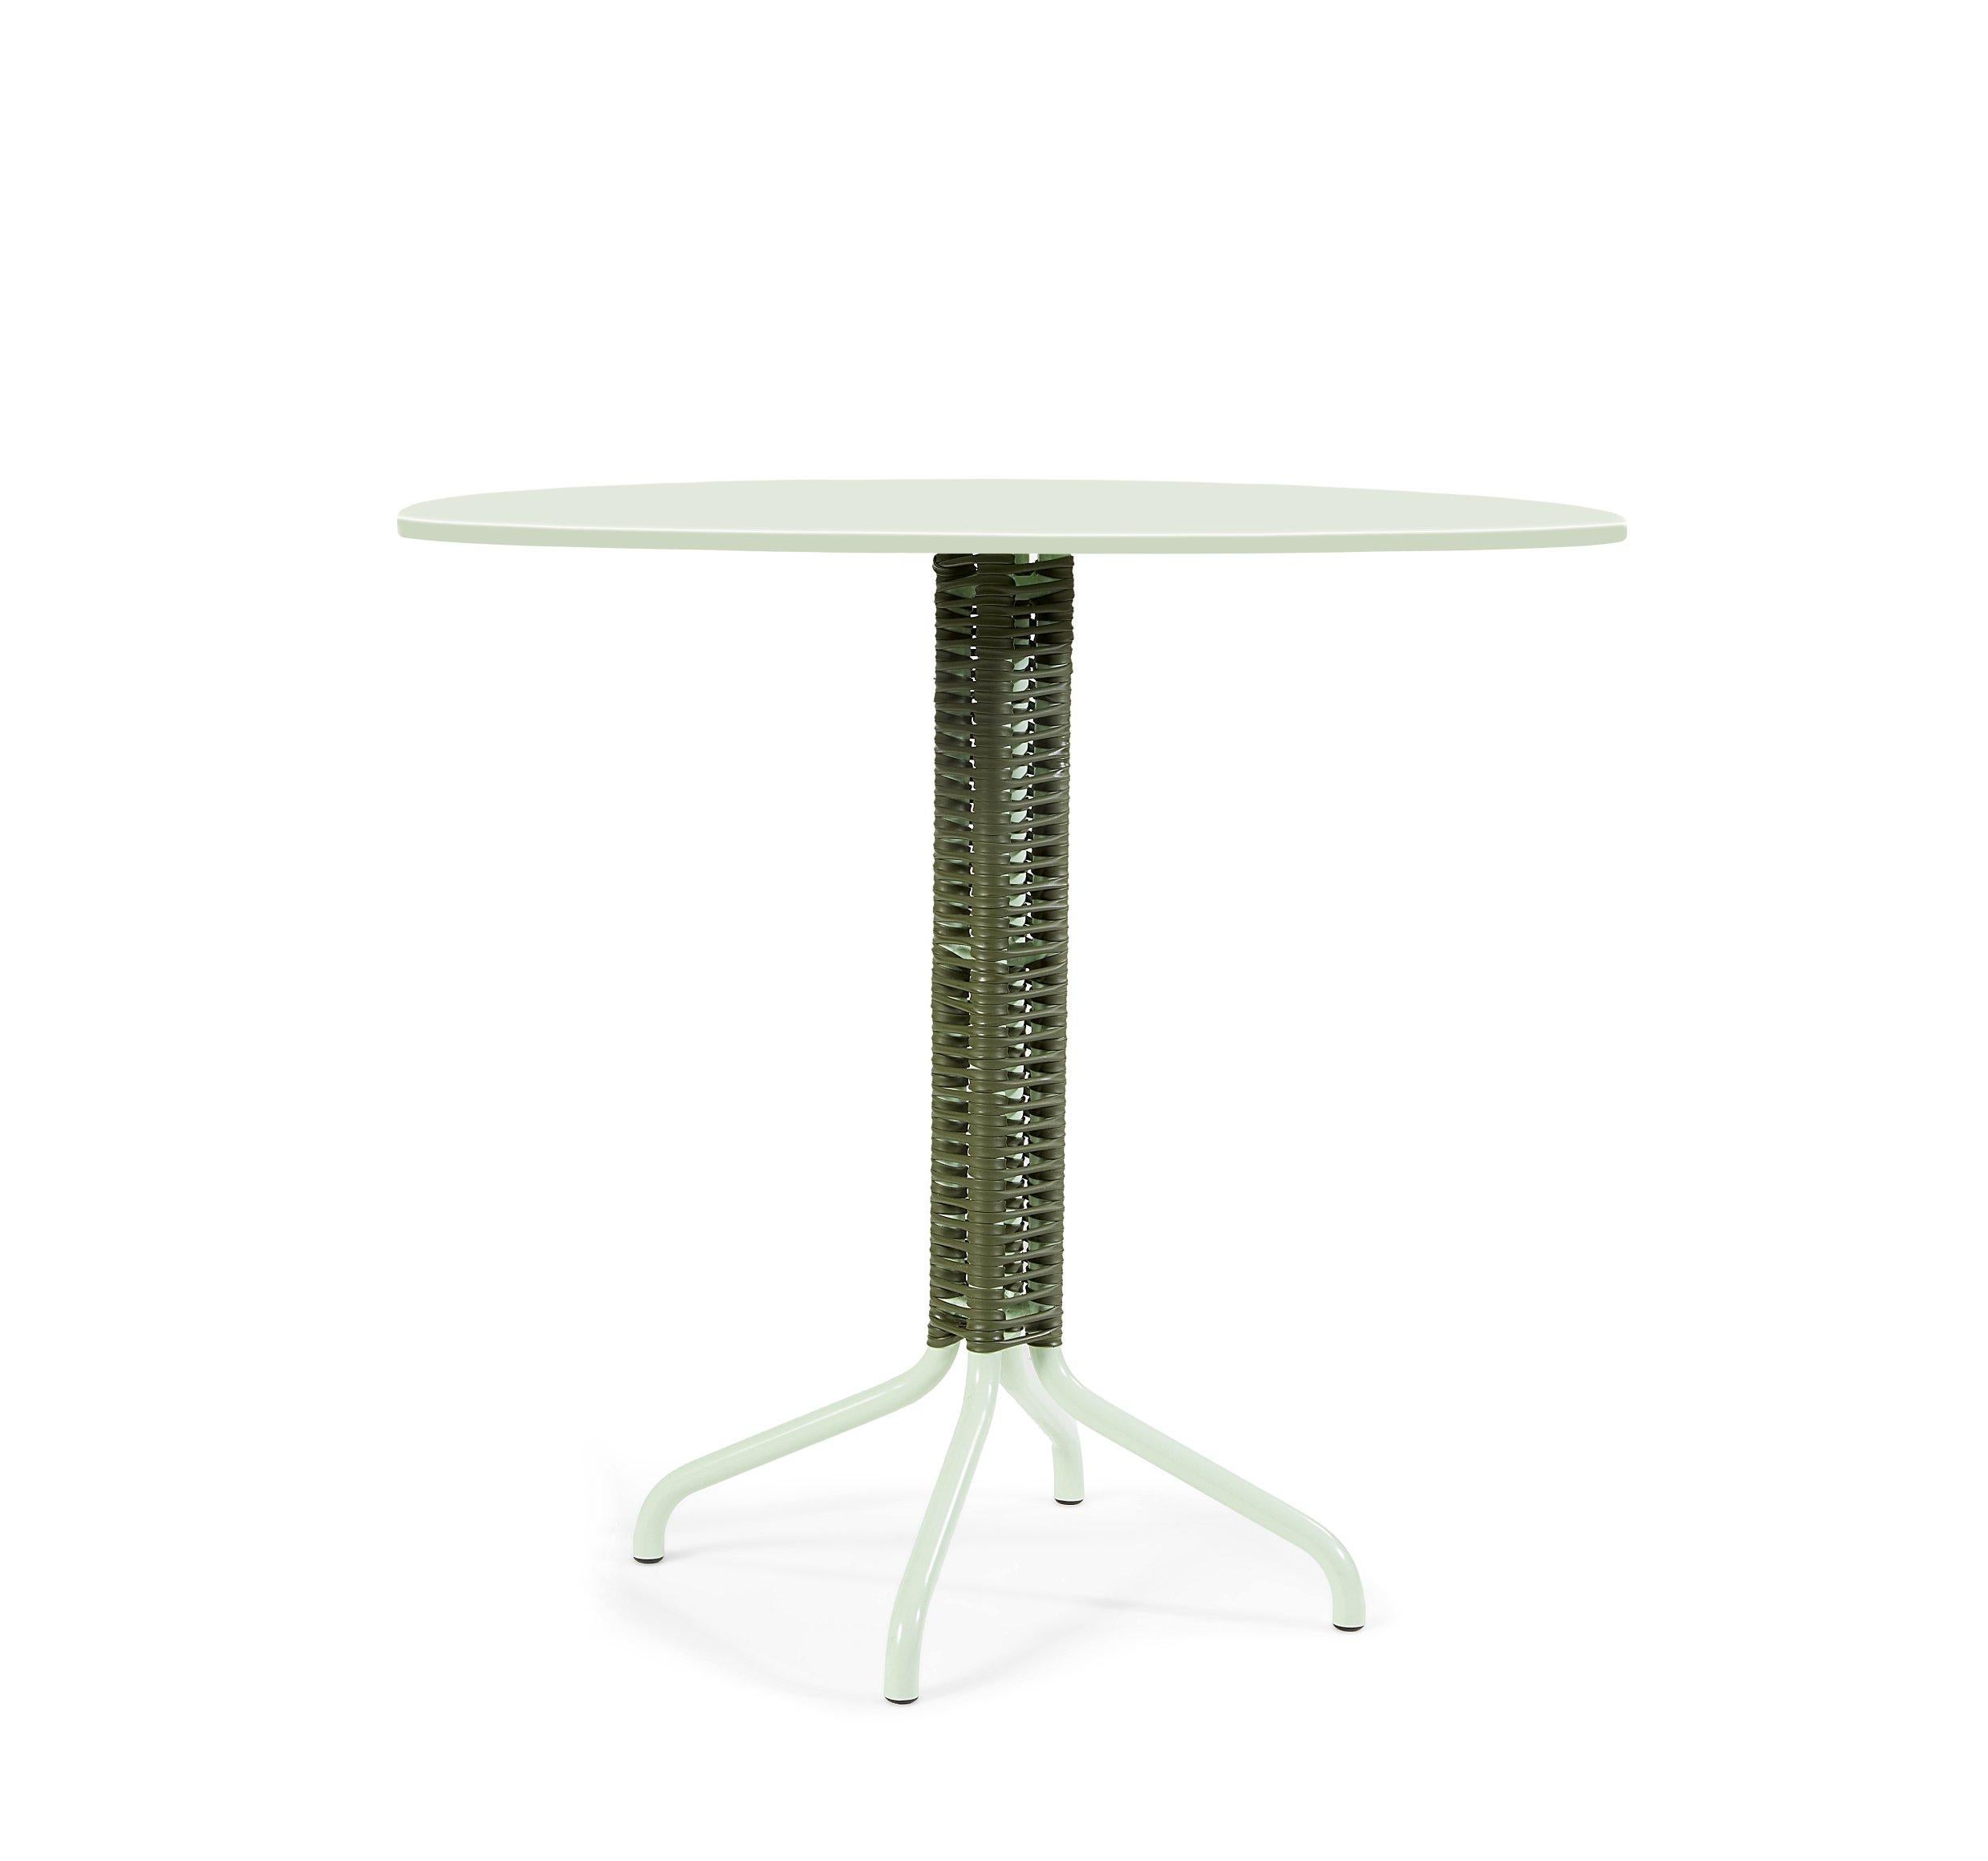 Black Cielo bistro table by Sebastian Herkner
Dimensions: 60 x 73 x 60 cm
Materials: metal

The popular cielo collection of chairs, loungers and lounge chairs - designed by Sebastian Herkner - is once again expanding: the elegant bistro table